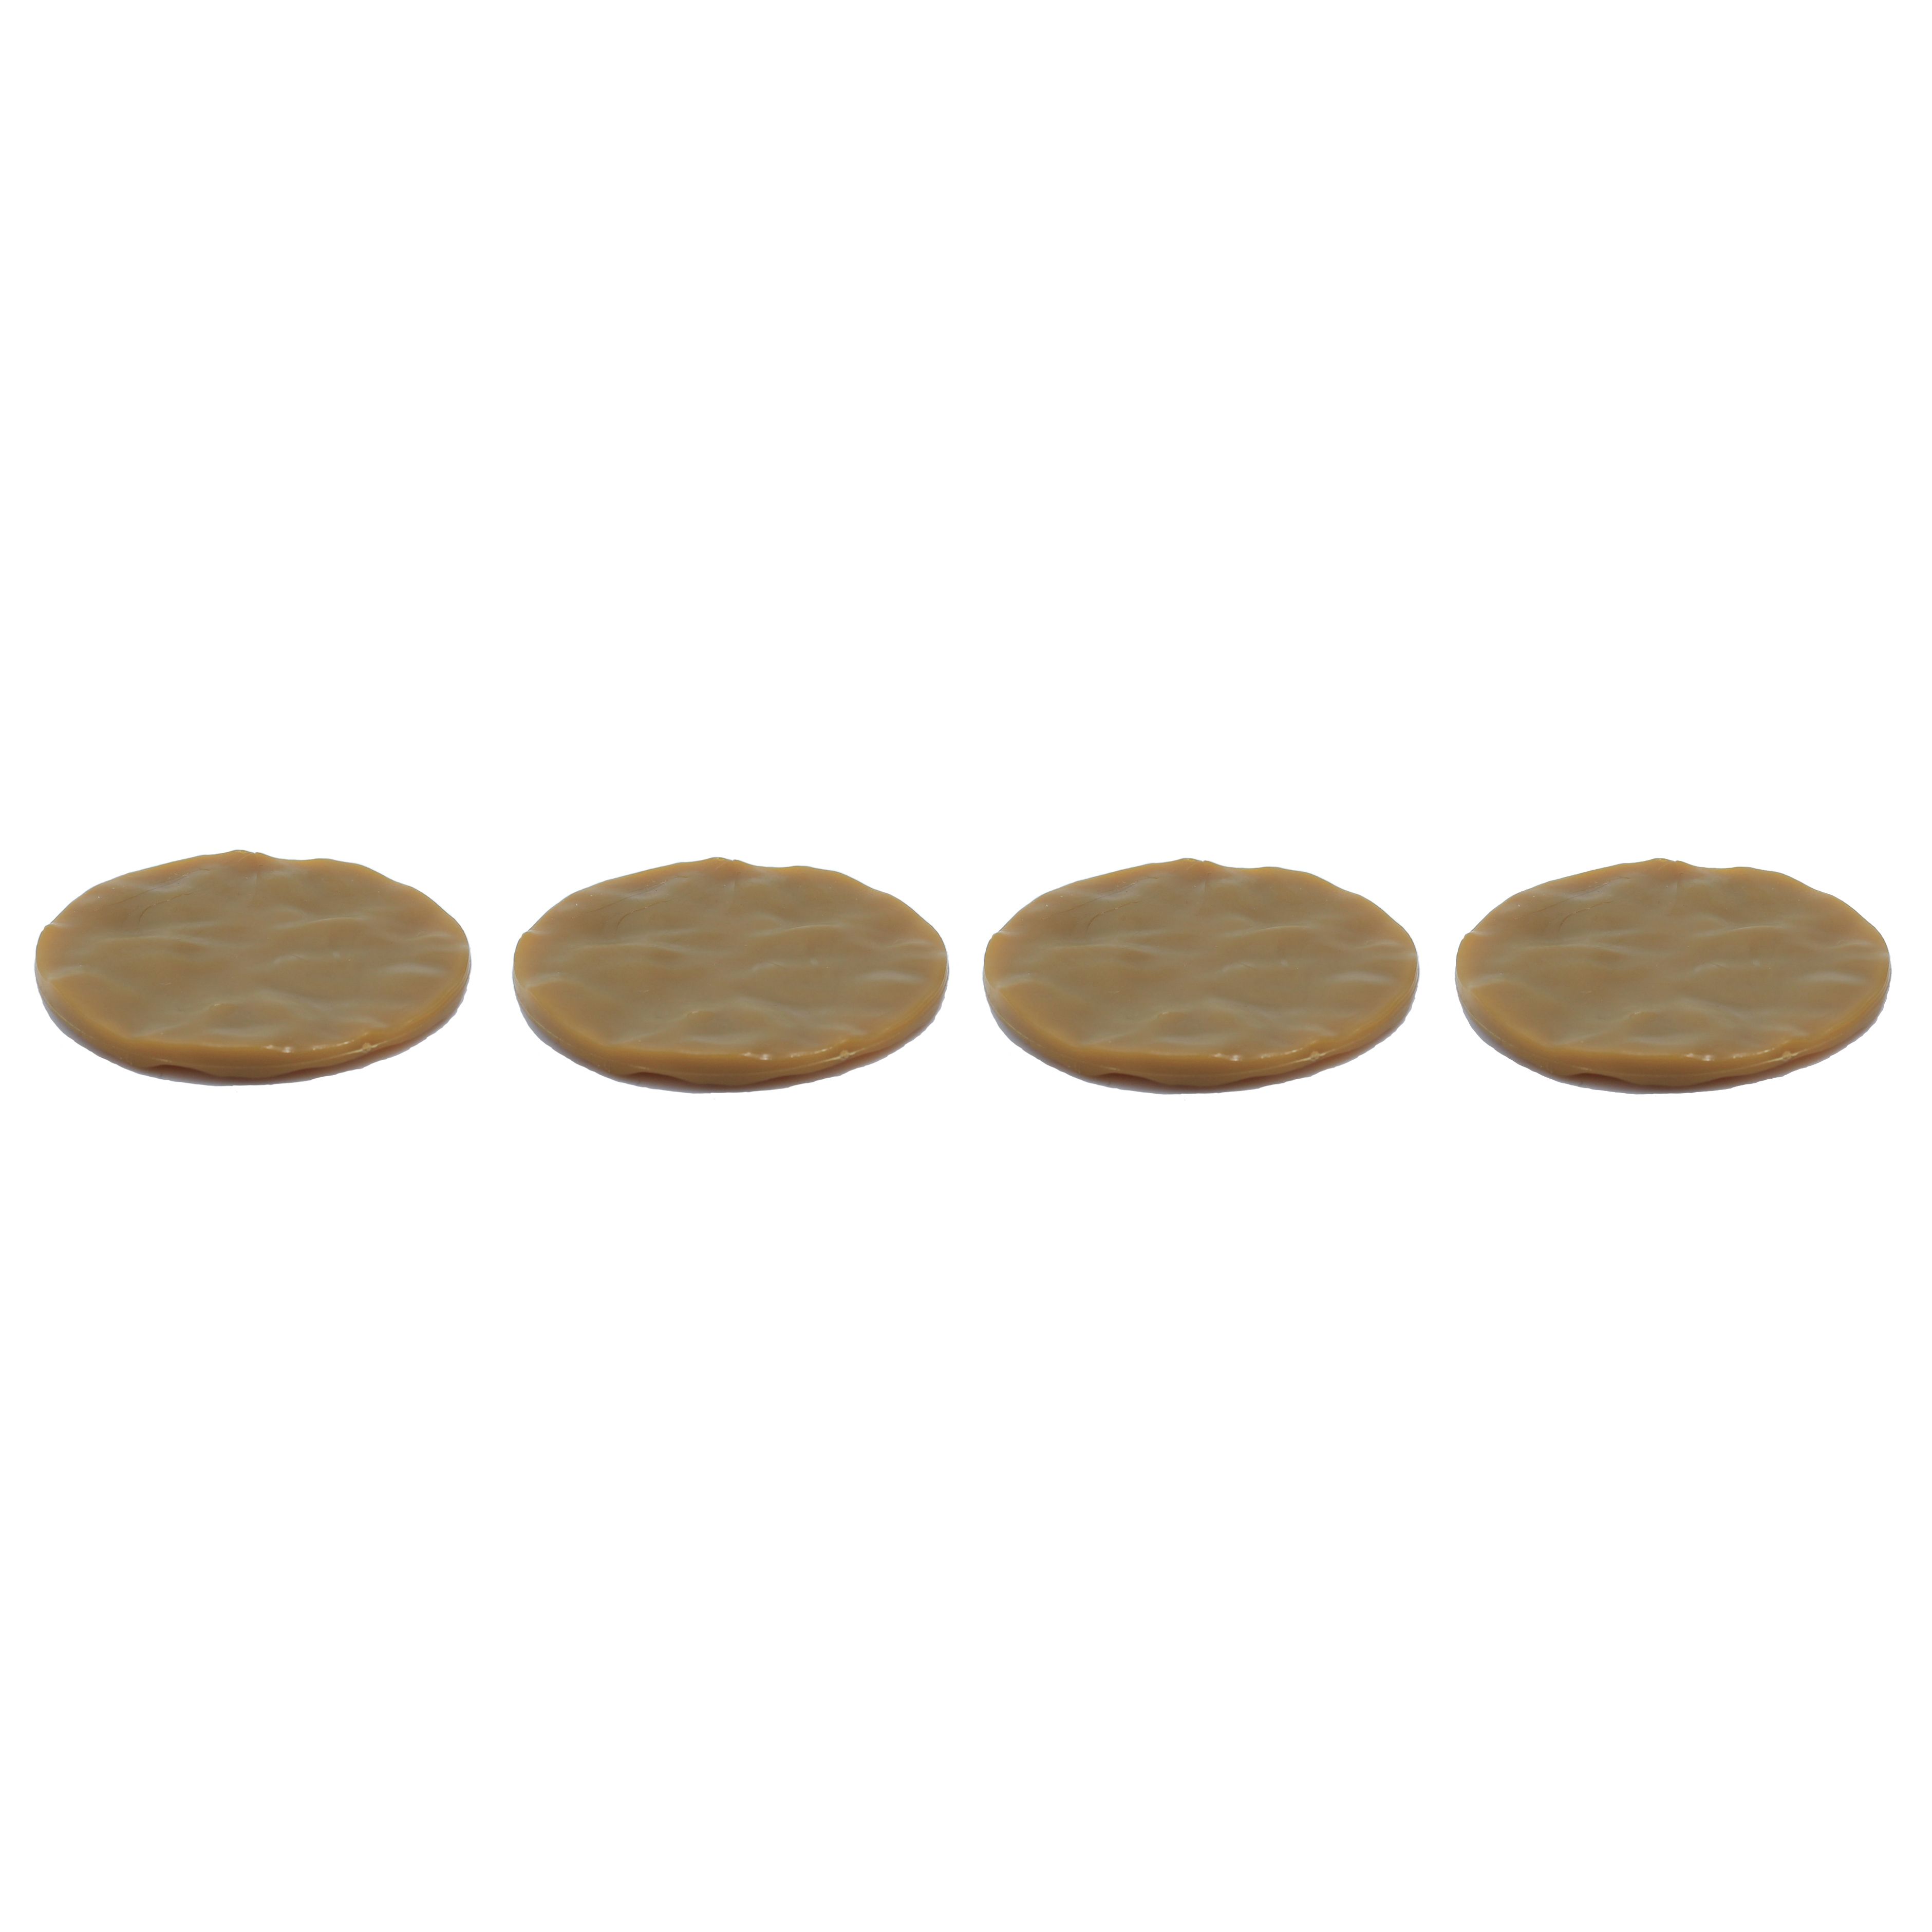 Brown Polyvinyl chloride (PVC) Protection pad (Dia)60mm, Pack of 4